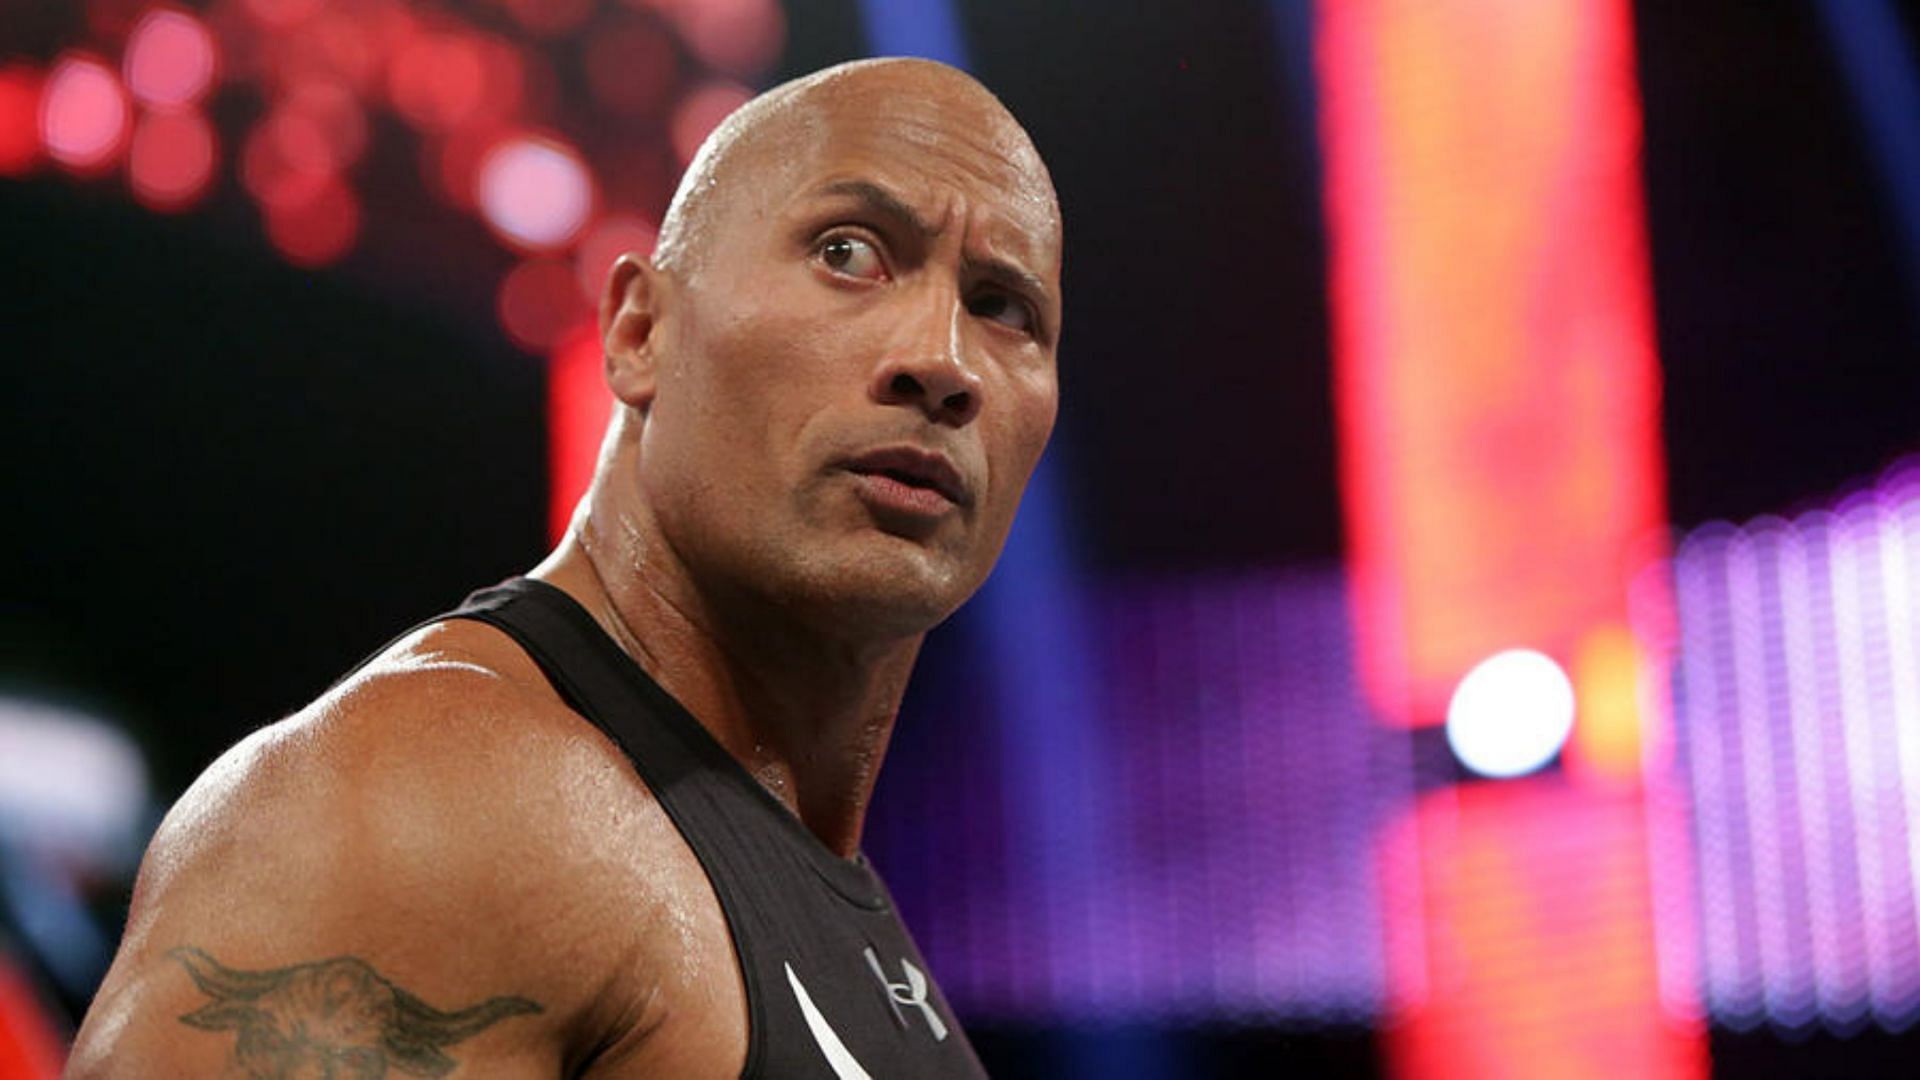 The Rock will return to the ring at WWE WrestleMania XL